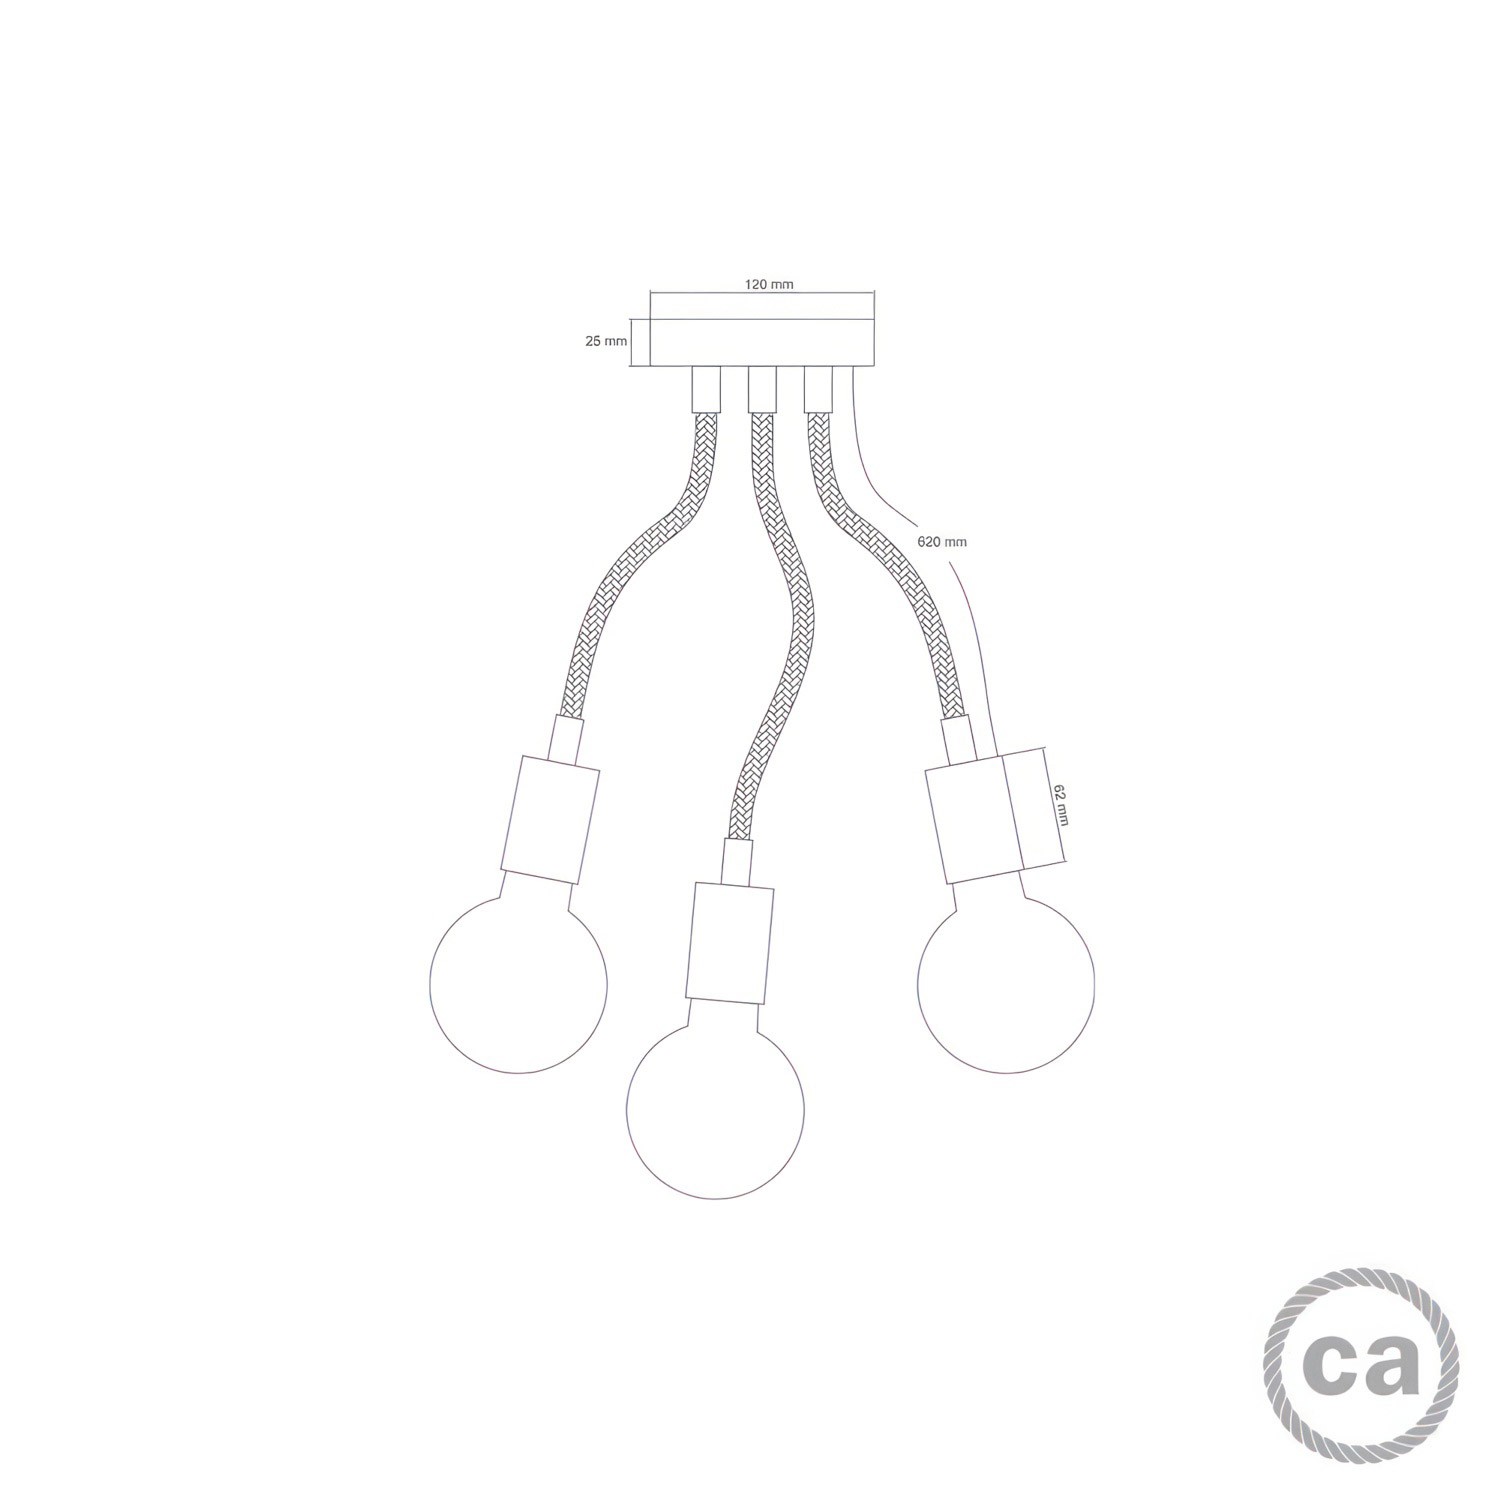 Flex 60 wall or ceiling lamp flexible provides diffused light with LED G95 light bulb